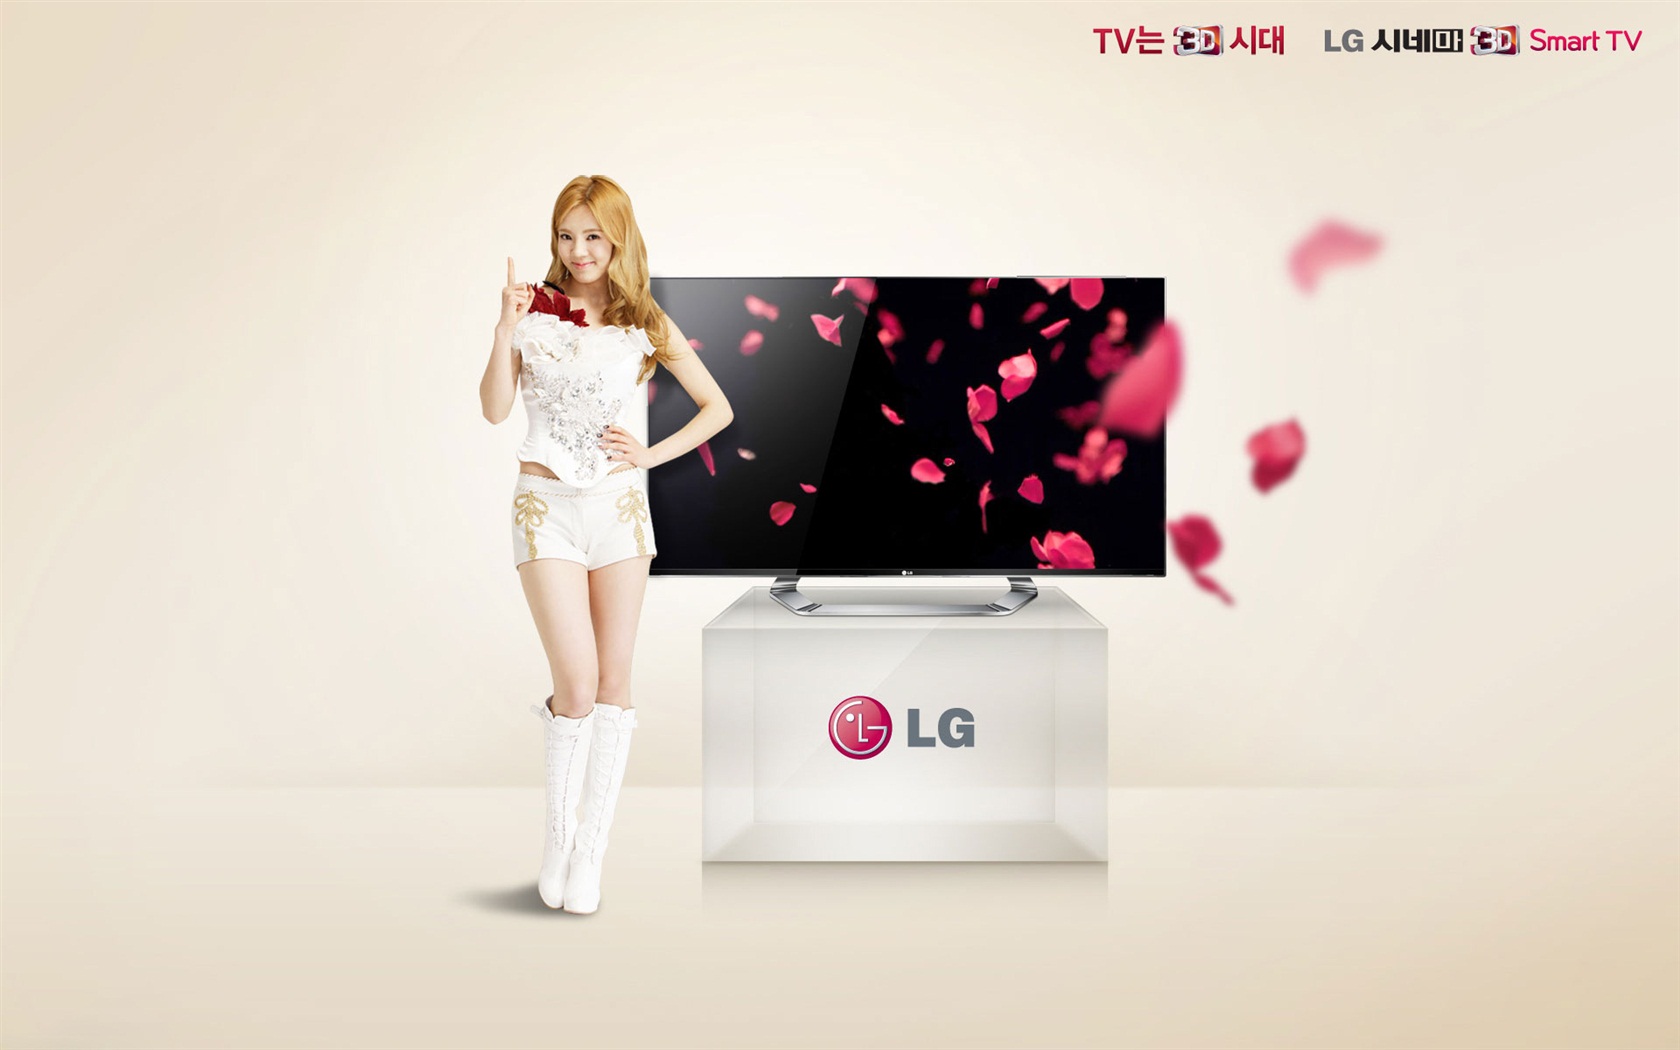 Girls Generation ACE and LG endorsements ads HD wallpapers #13 - 1680x1050